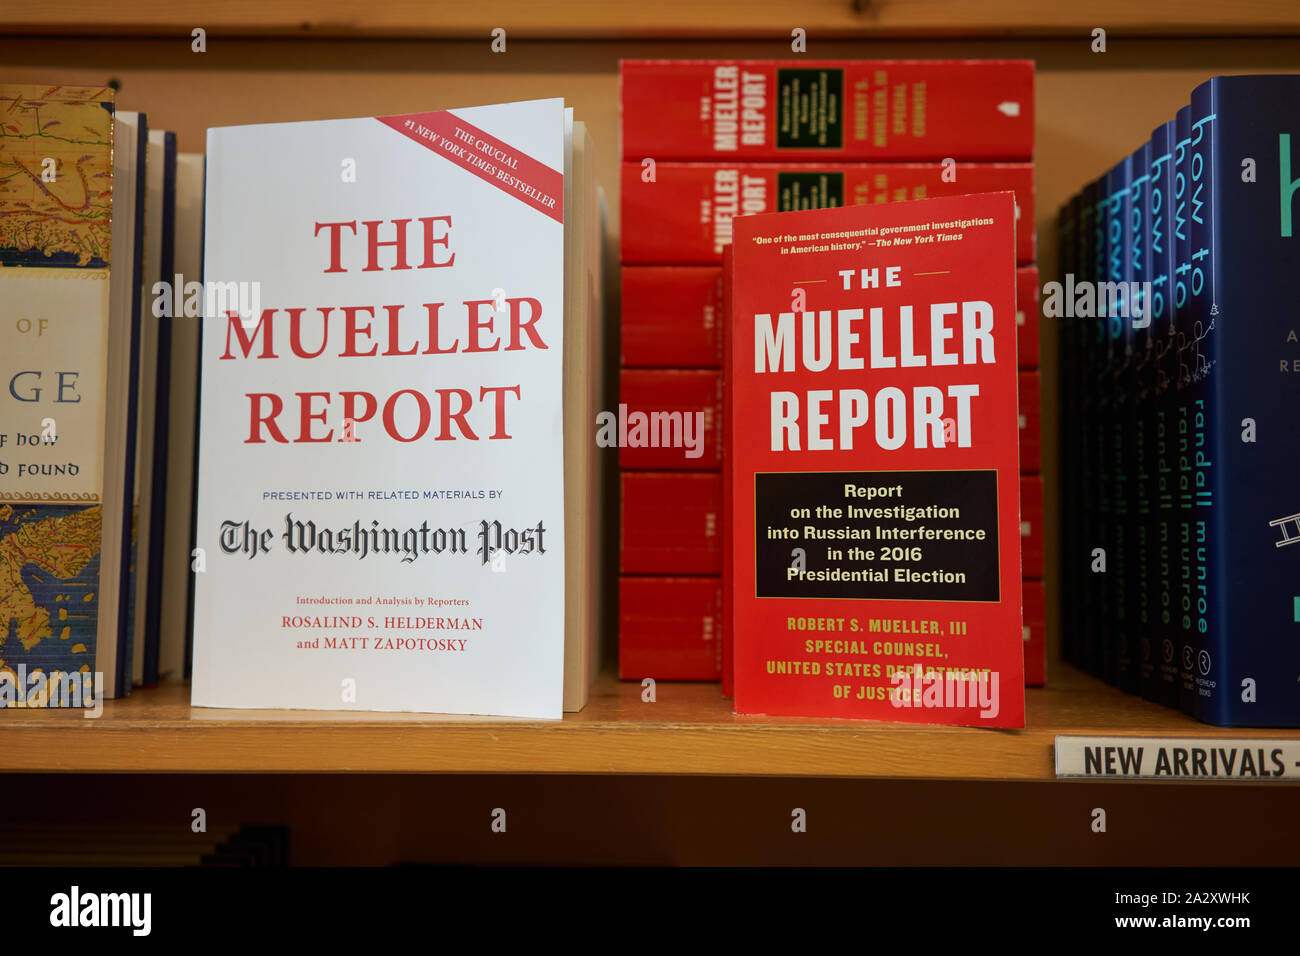 Portland, OR, USA - Sep 27, 2019: Robert Mueller's book 'The Mueller Report' displayed in Powell's Bookstore in Portland. Stock Photo